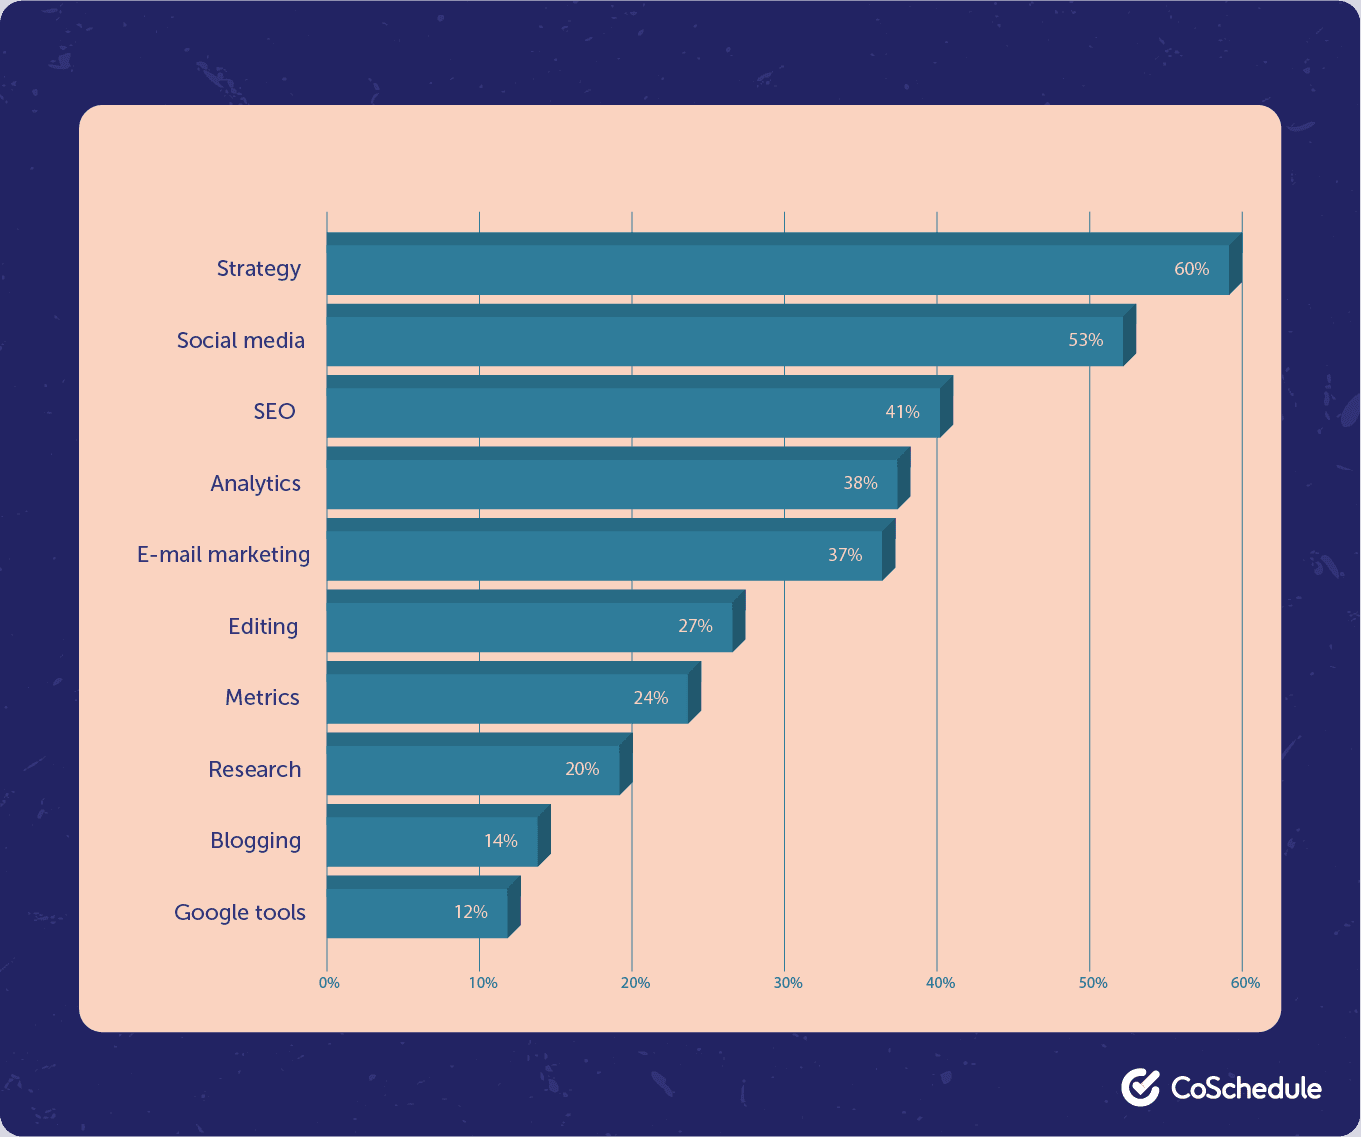 Statista most in demand skills for content marketers